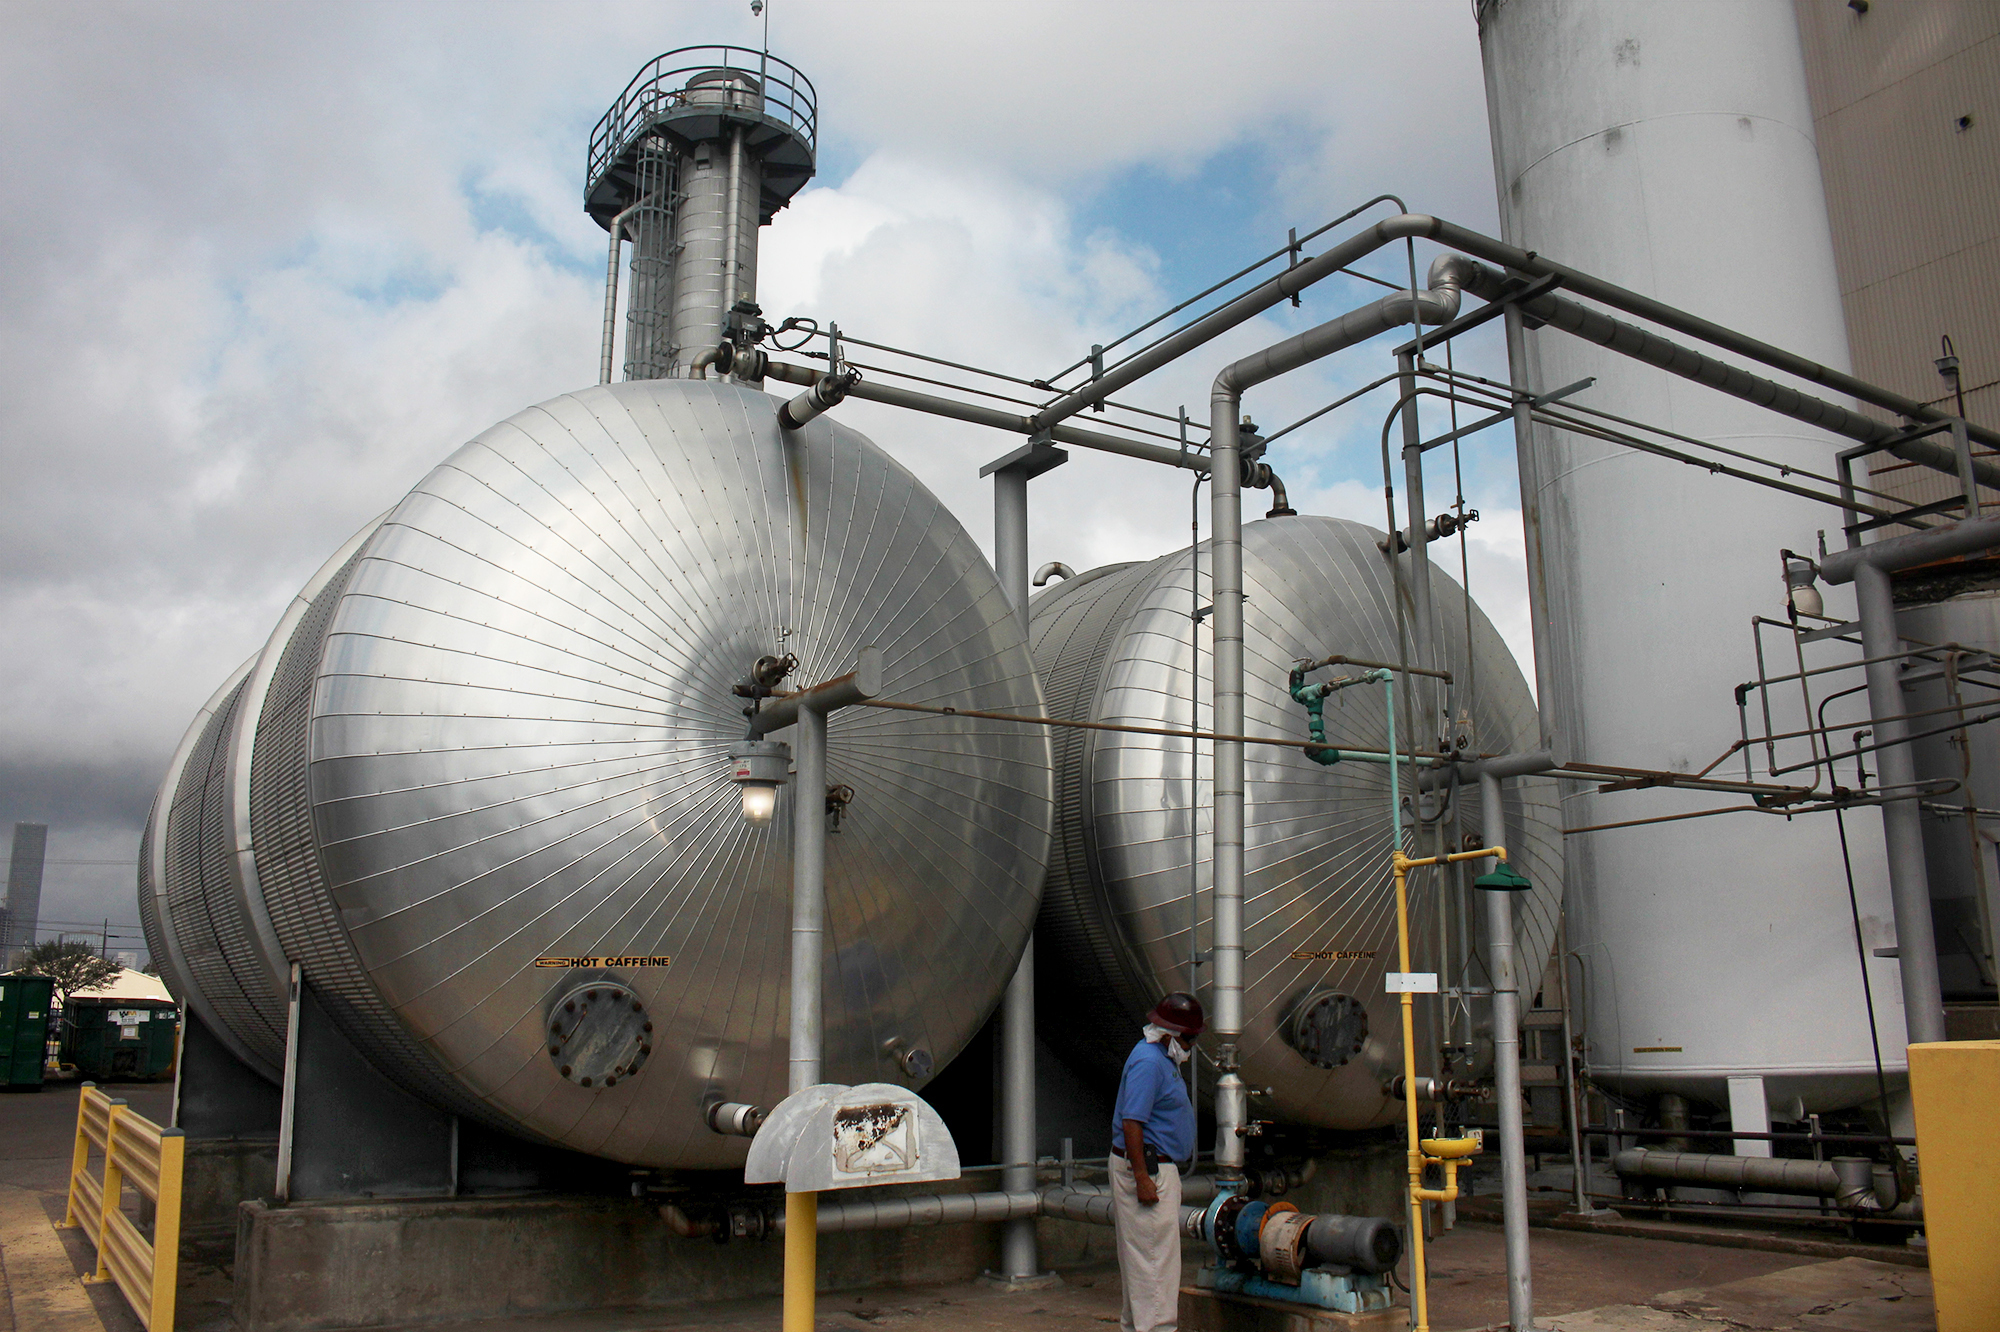 Boris Wheatley, a manager at Atlantic Coffee Solutions, inspects two tanks filled with a mixture of hot water and caffeine. The water will be evaporated to obtain crude caffeine powder.